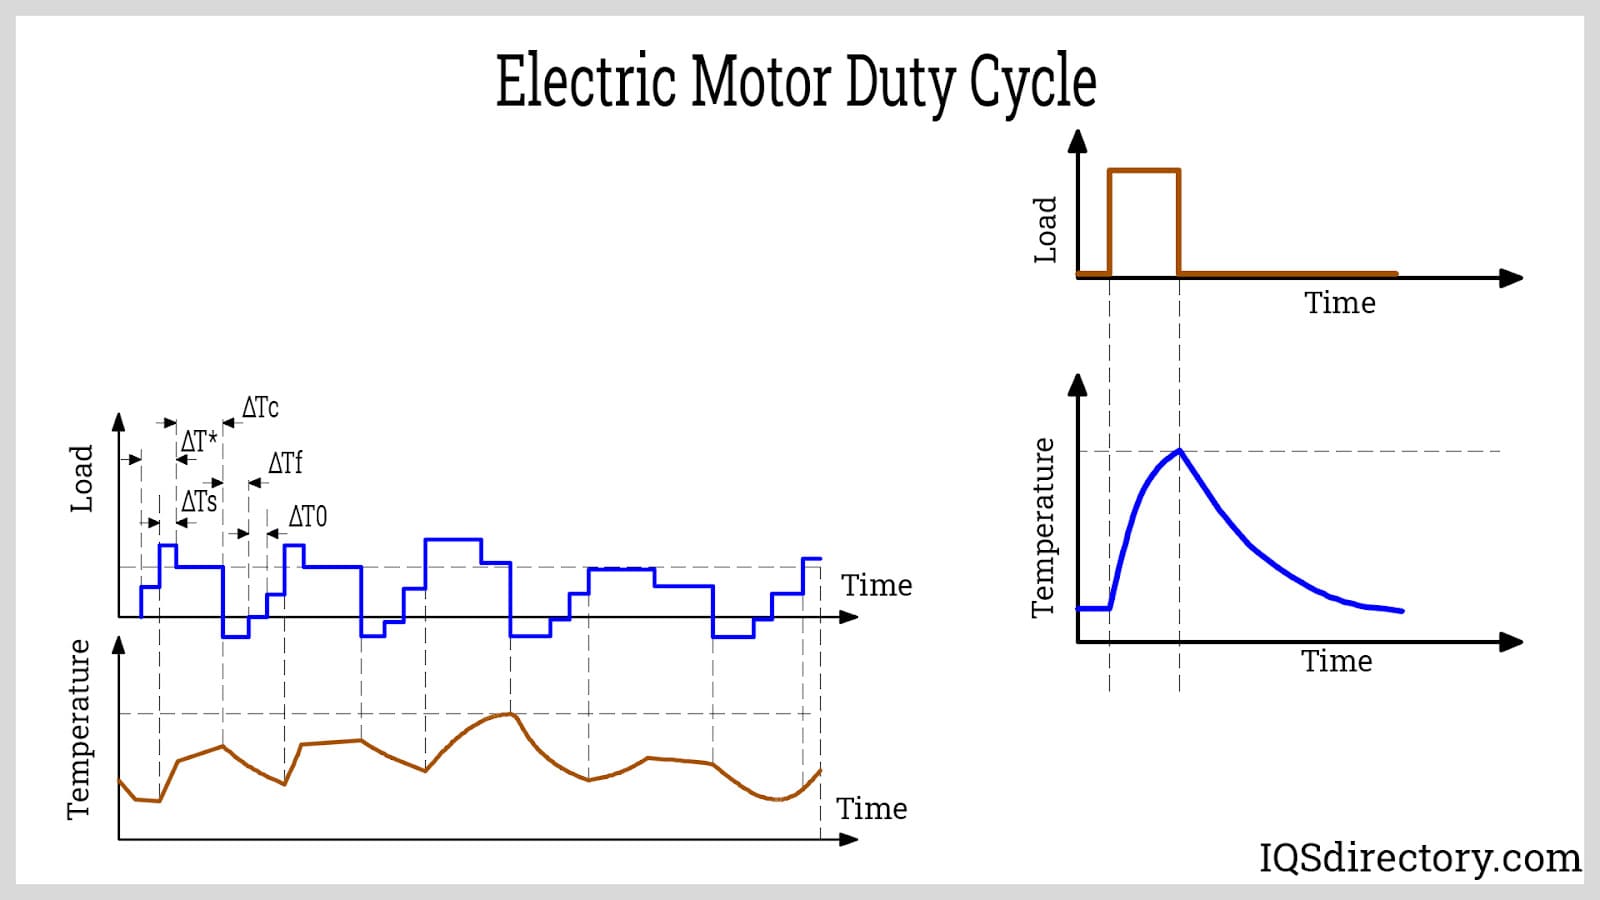 Electric Motor Duty Cycle